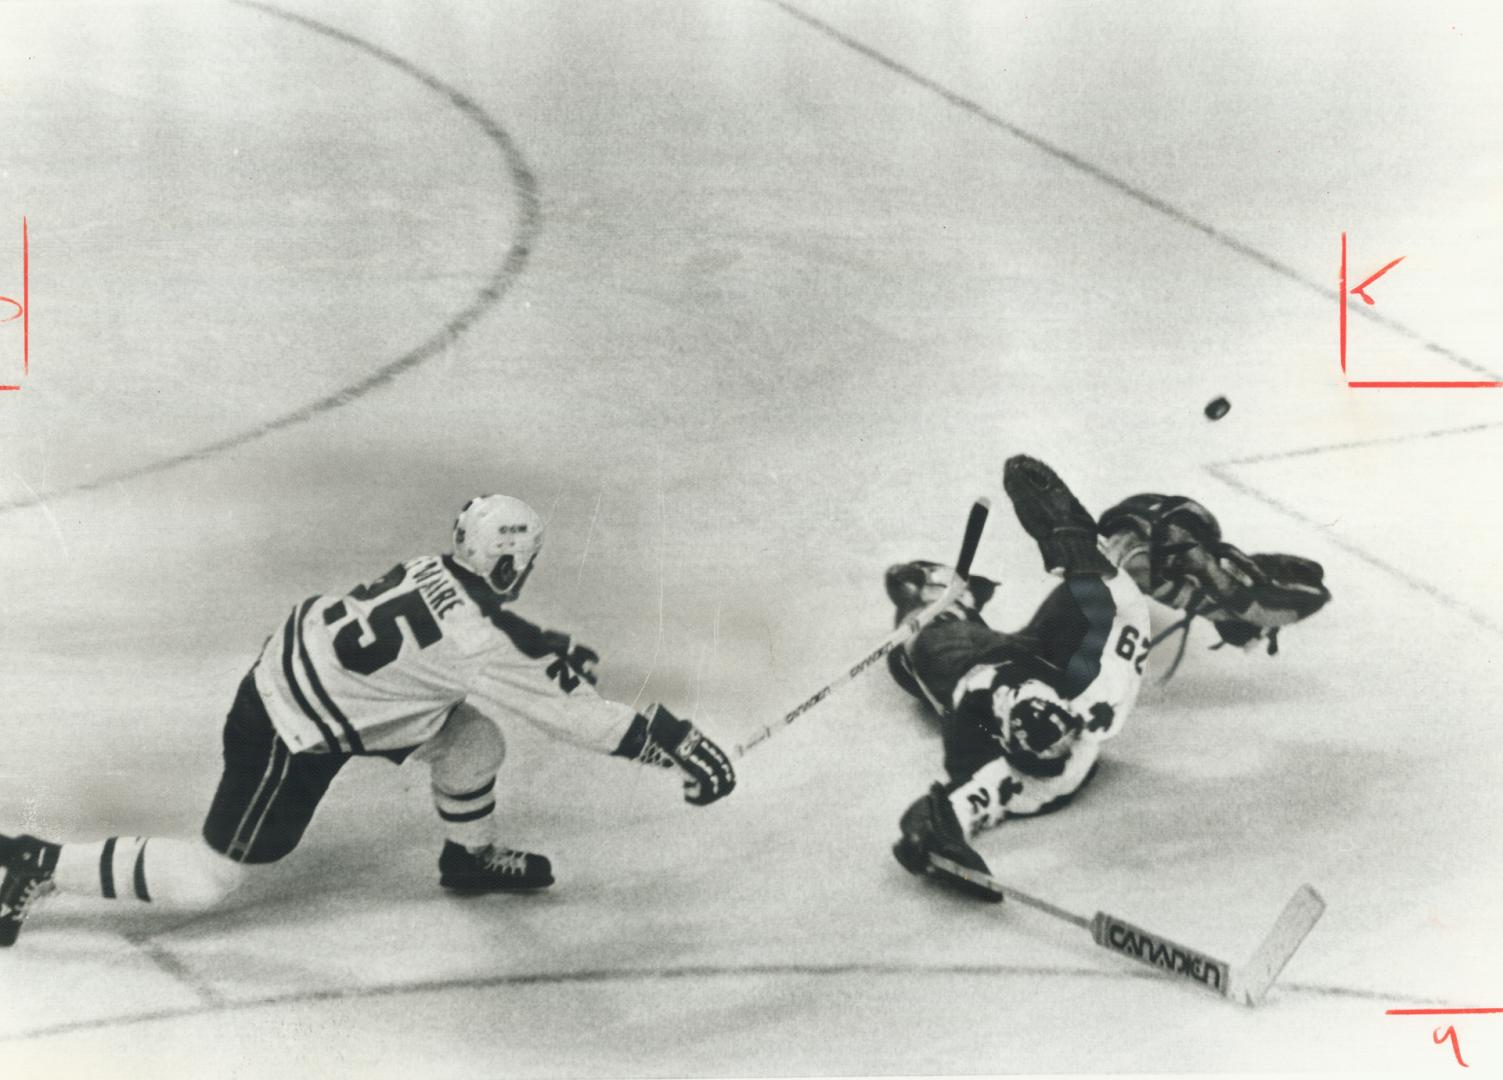 Jacques Lemaire won the race to the puck, tipping it over a sliding Mike Palmateer for Montreal's third goal